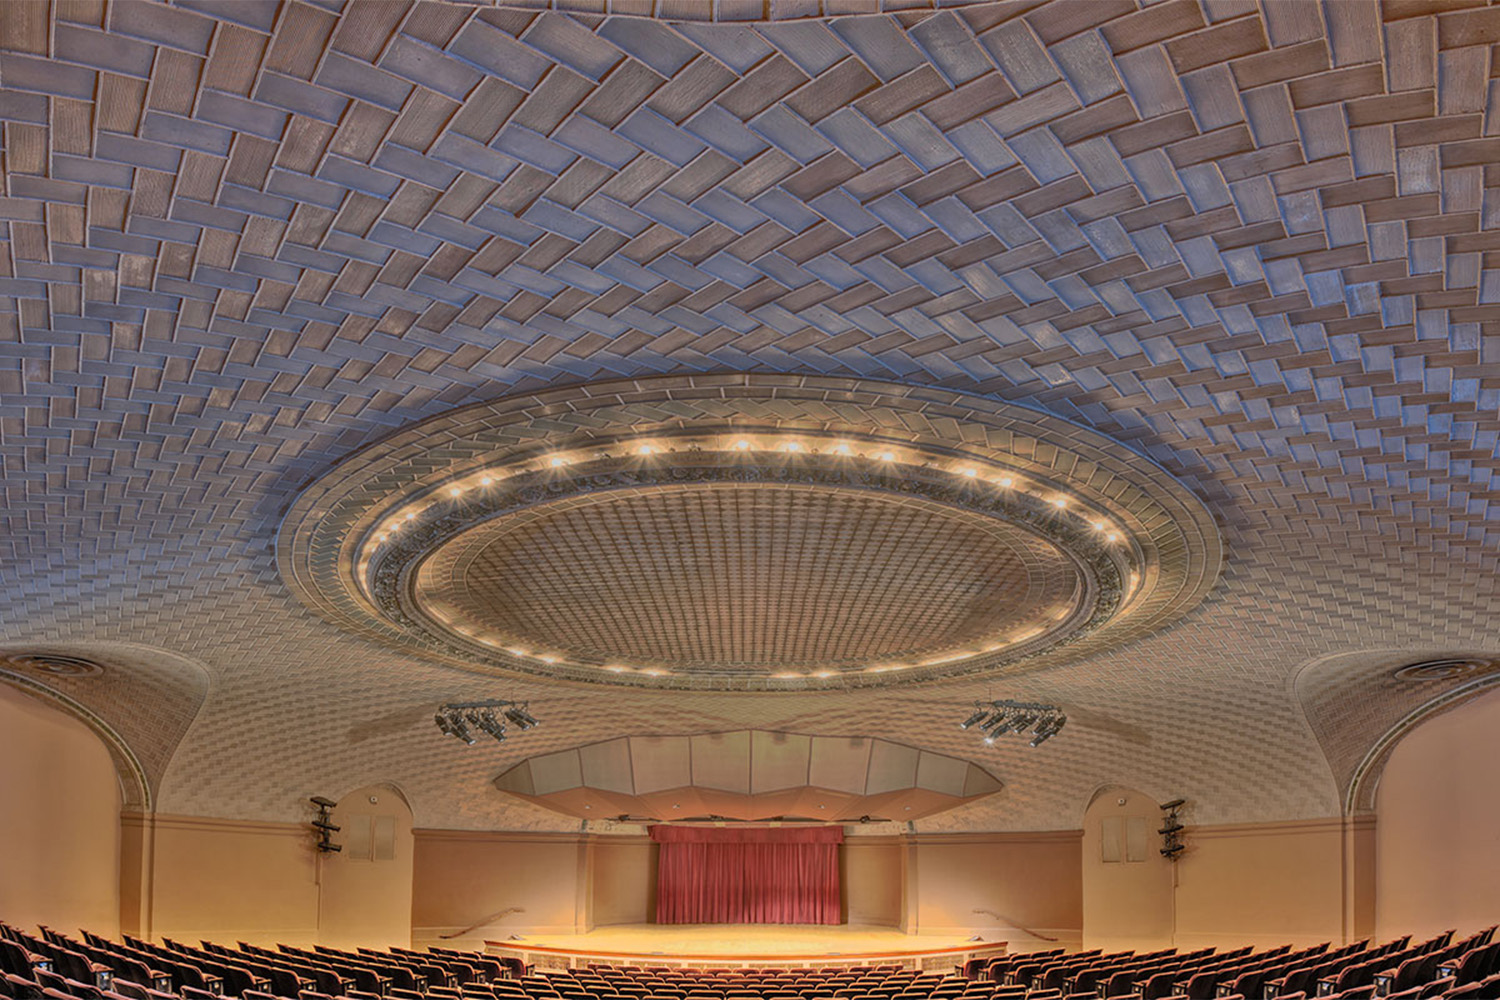 zoomed in view of the ceiling at the Baird Auditorium in Washington, D.C.